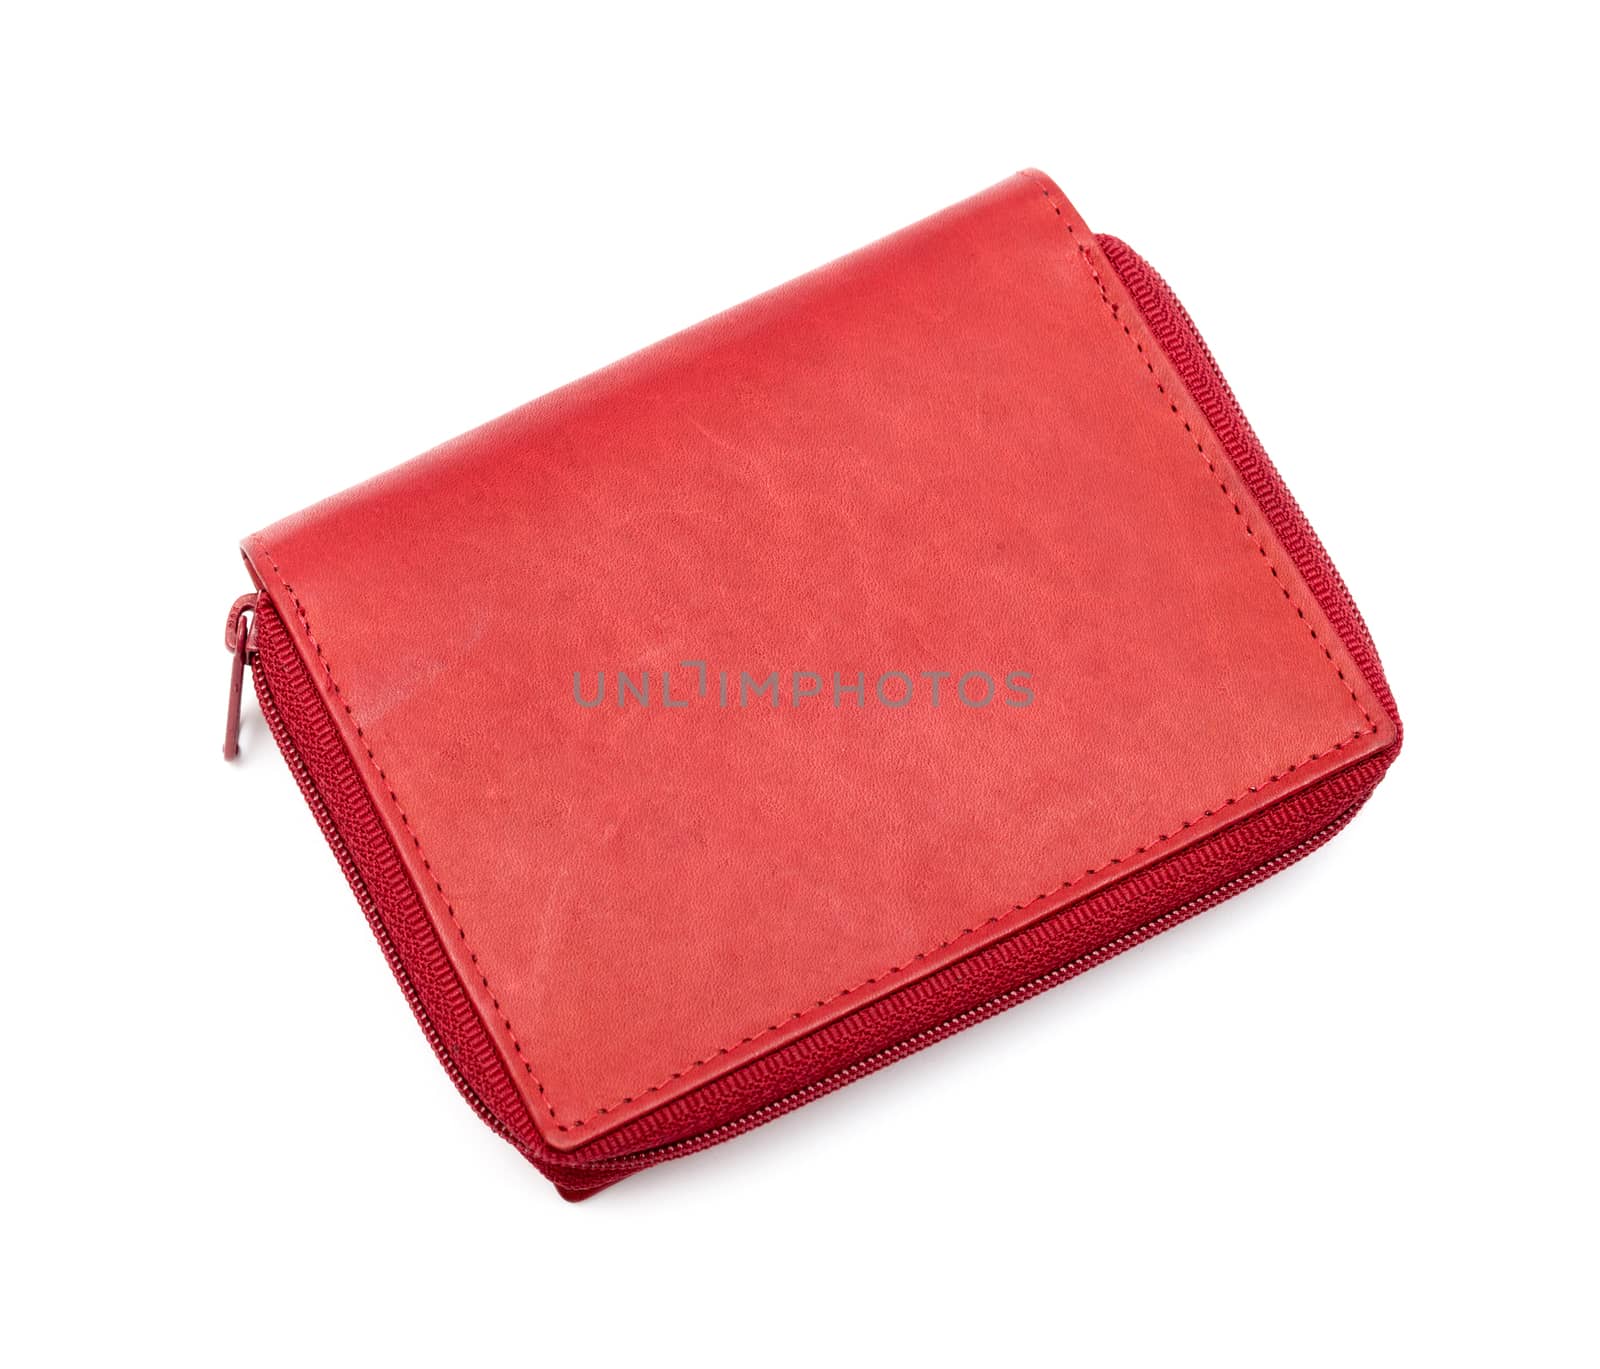 Modern red wallet isolated on white background